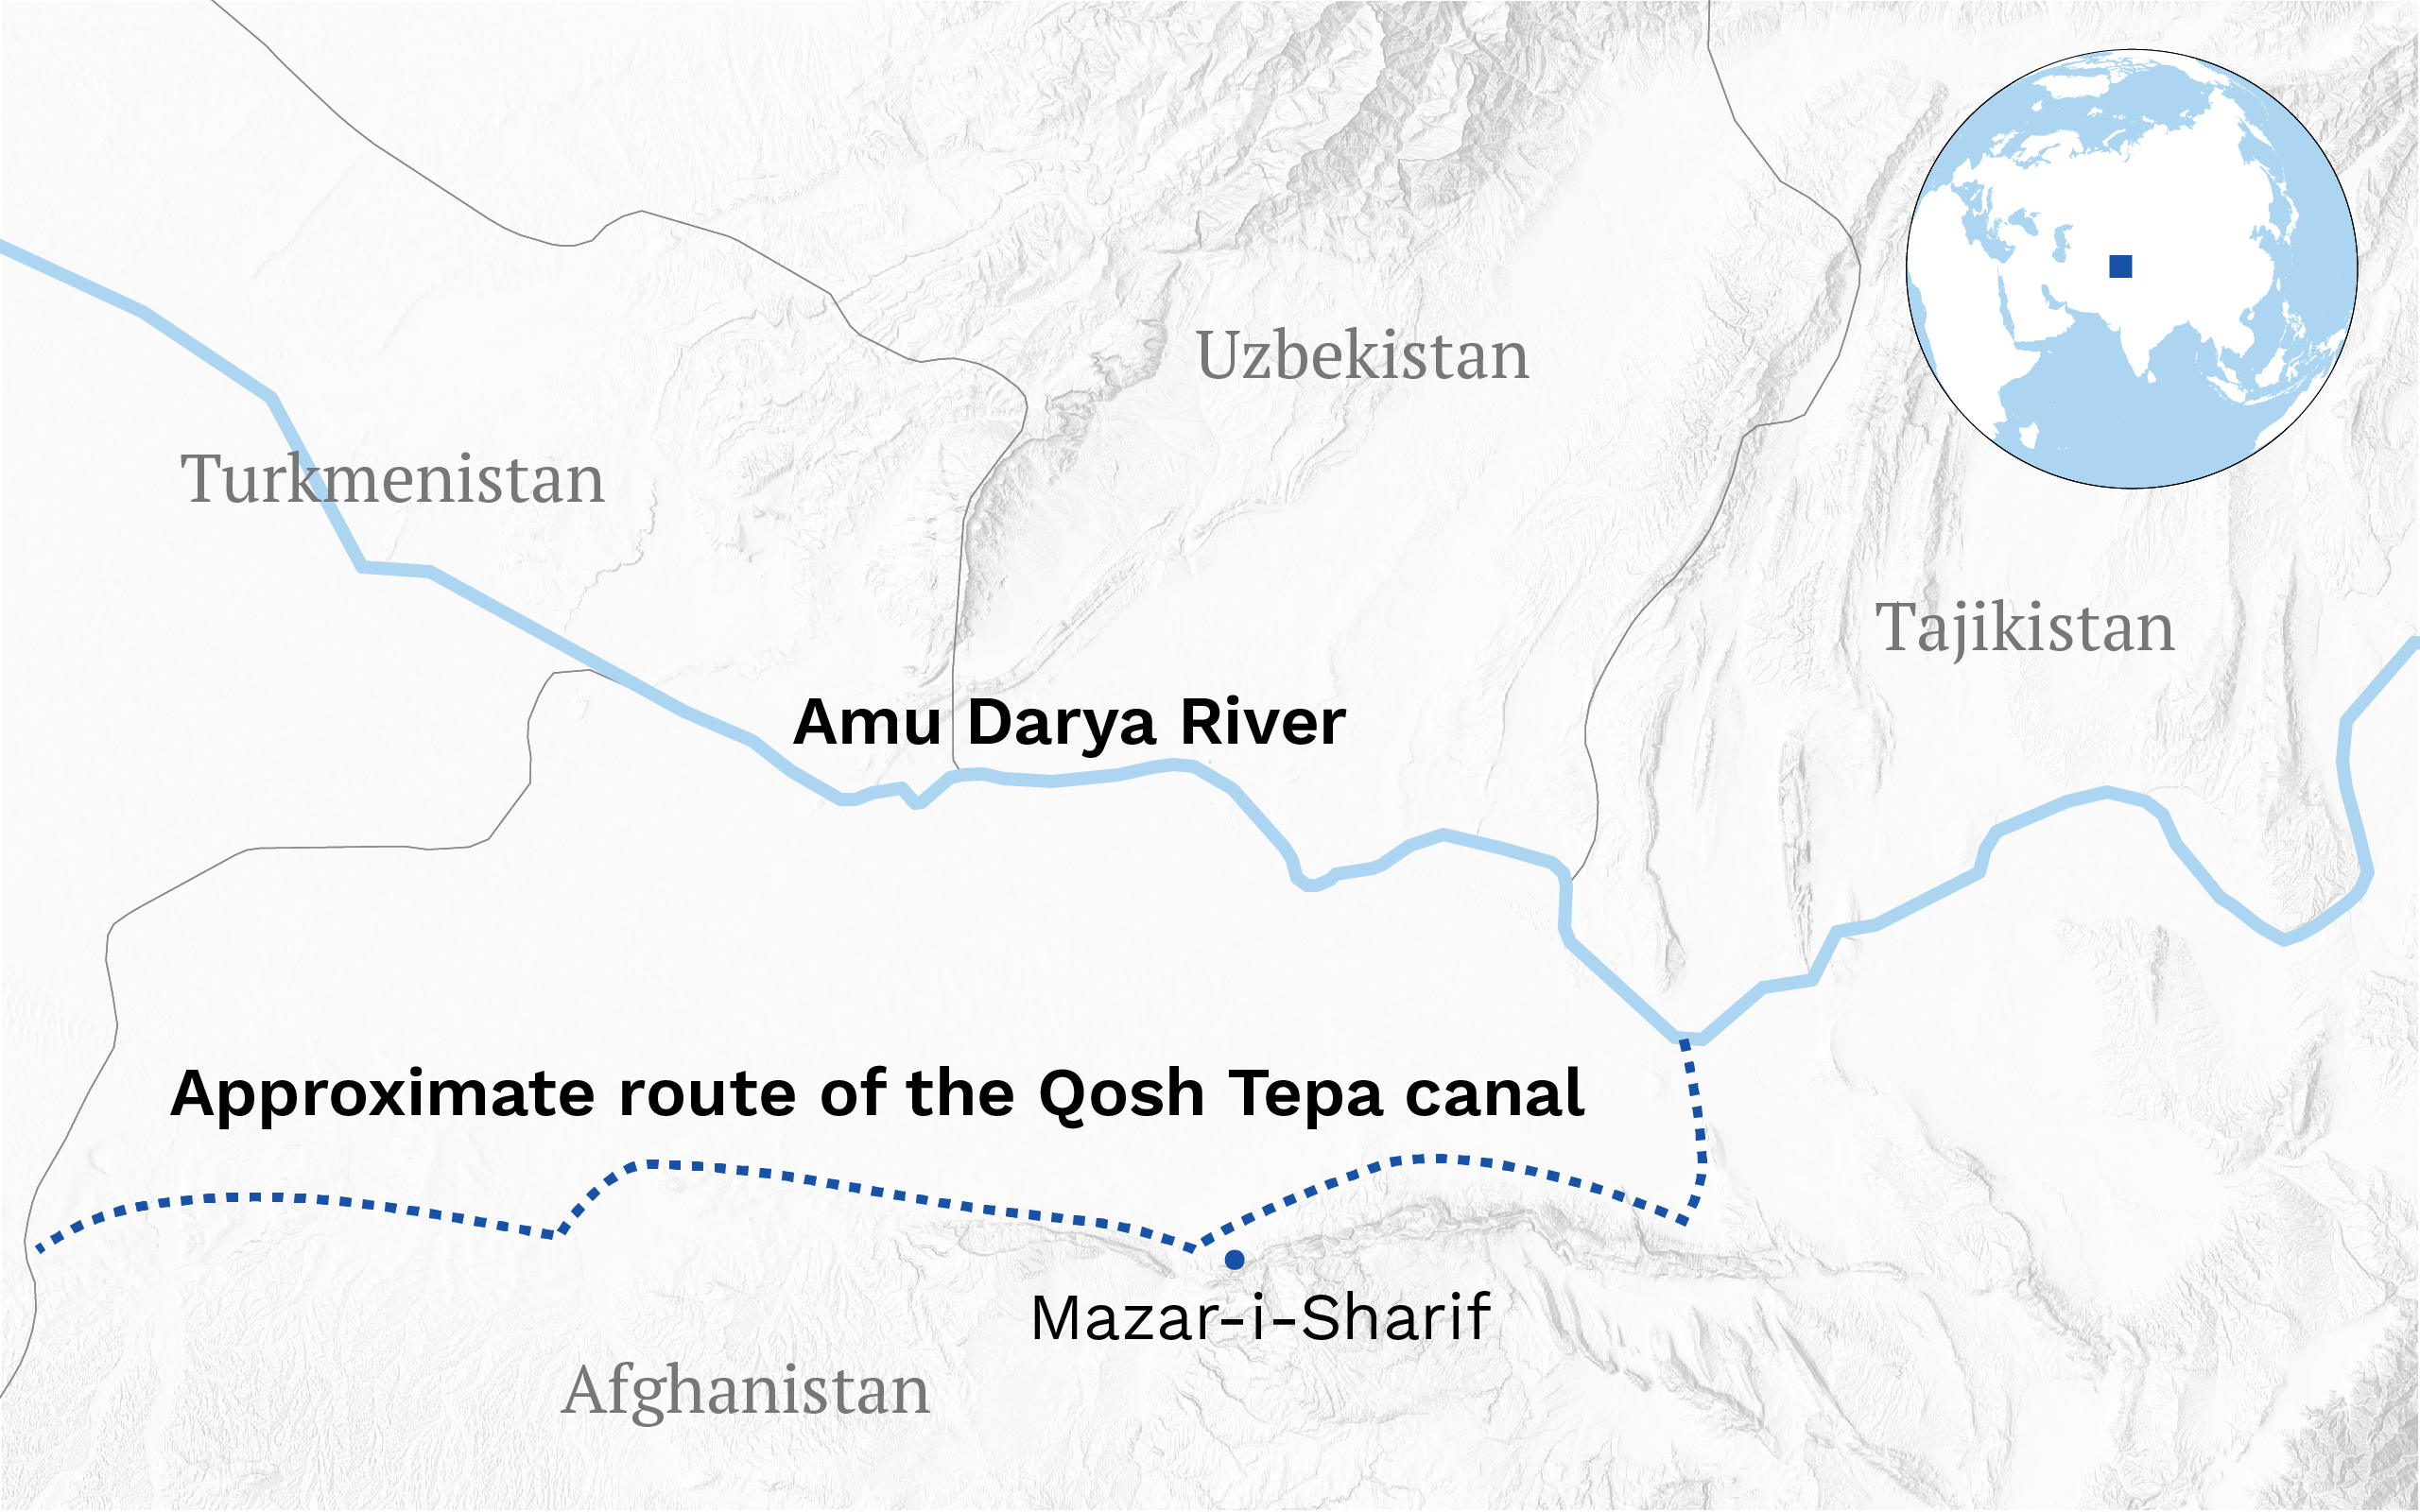 Map showing approximate route of Qosh Tepa Canal